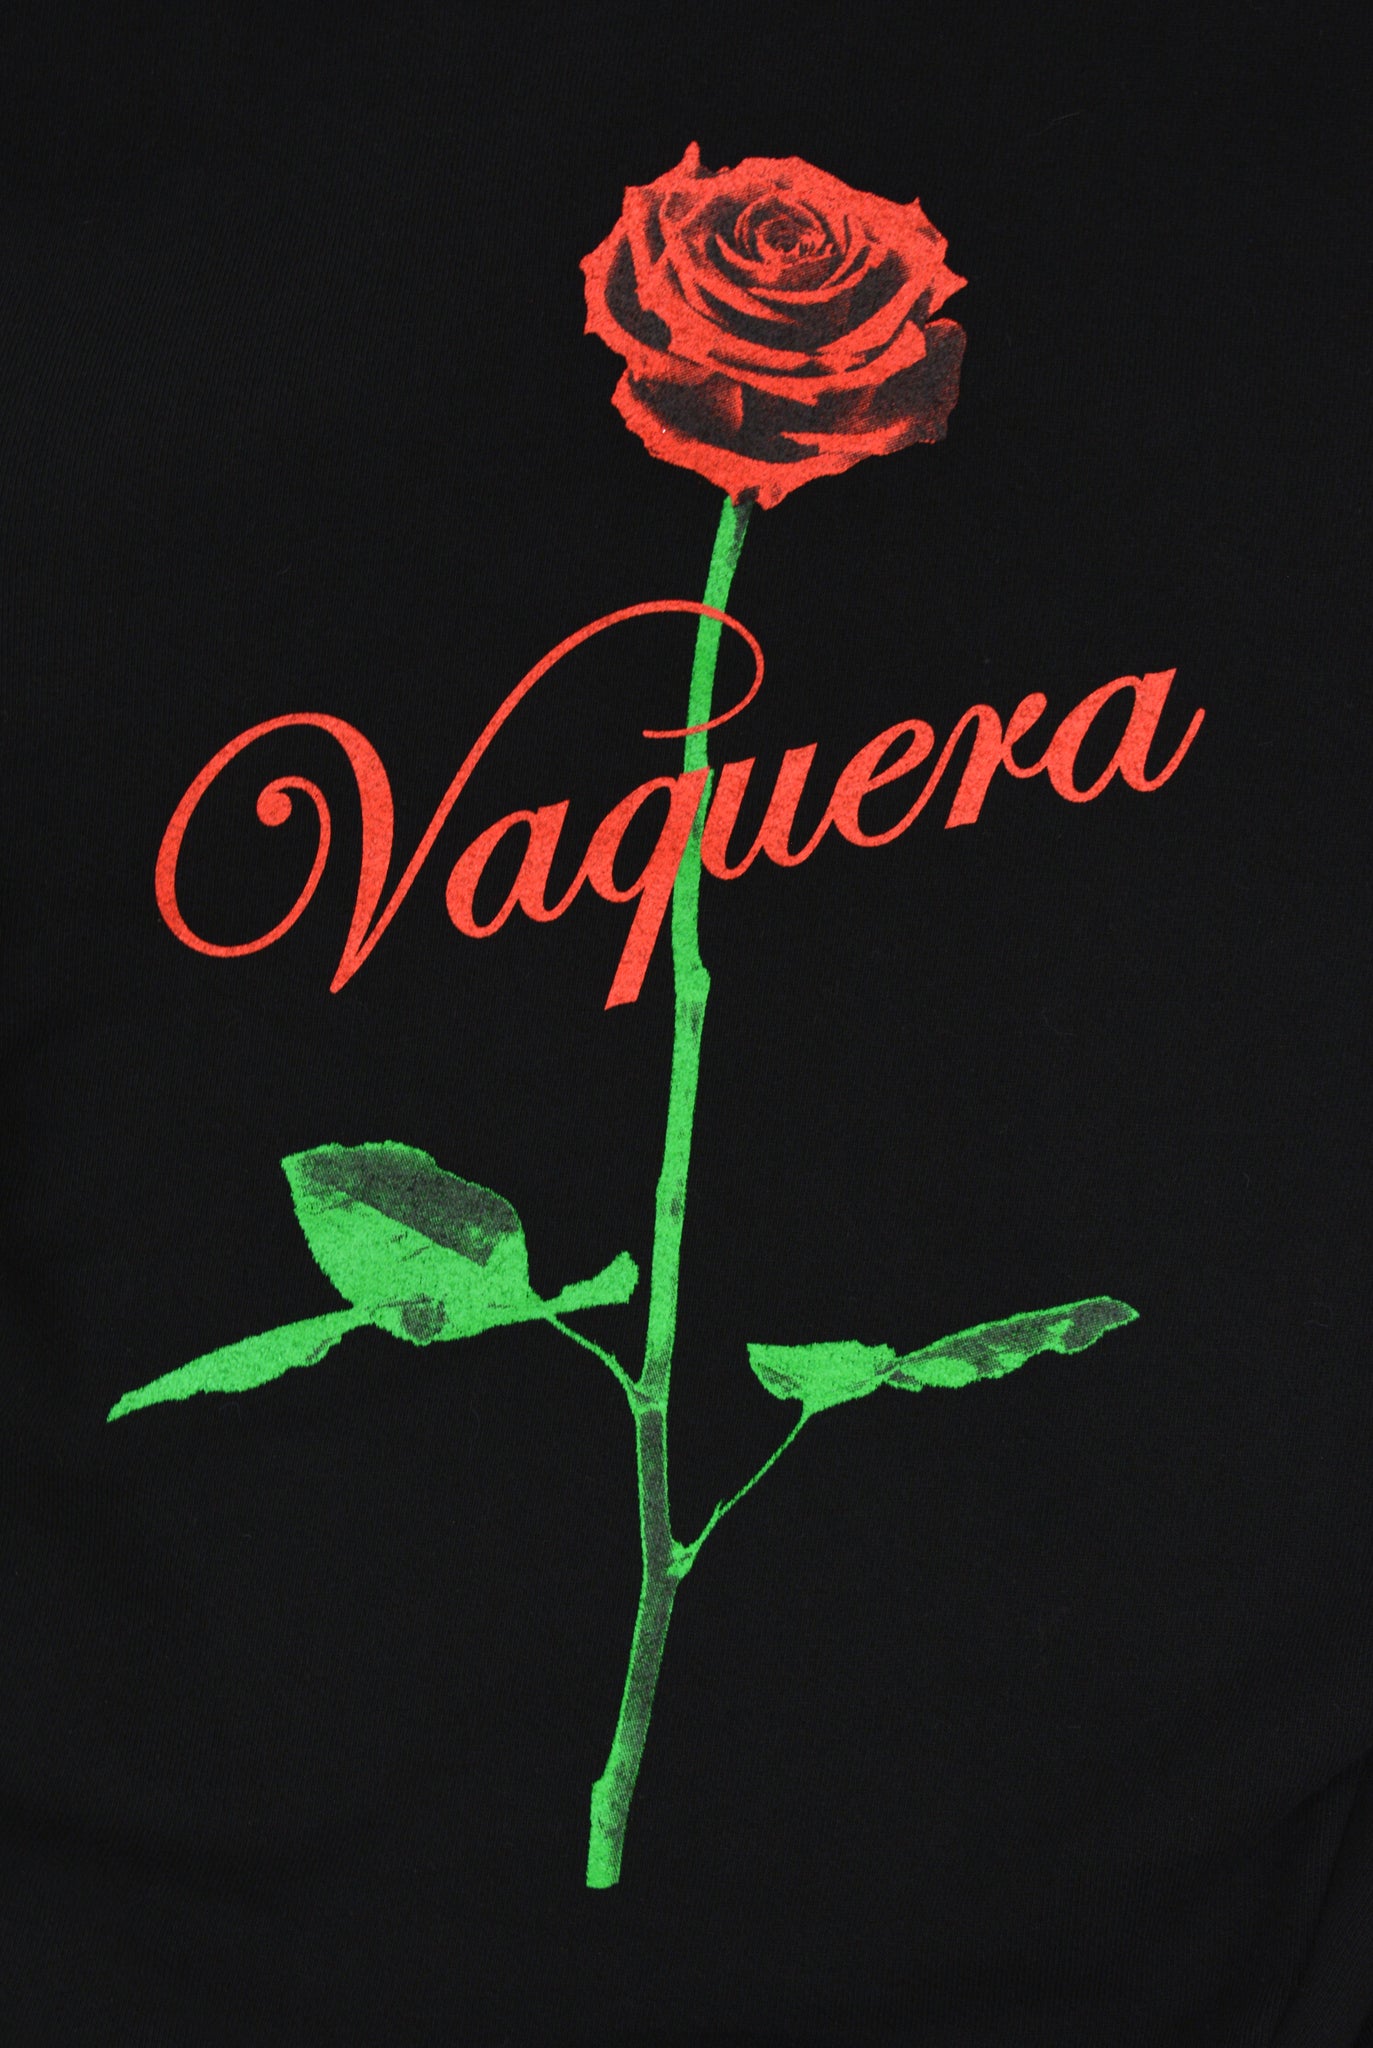 Vaquera Twisted Hoodie